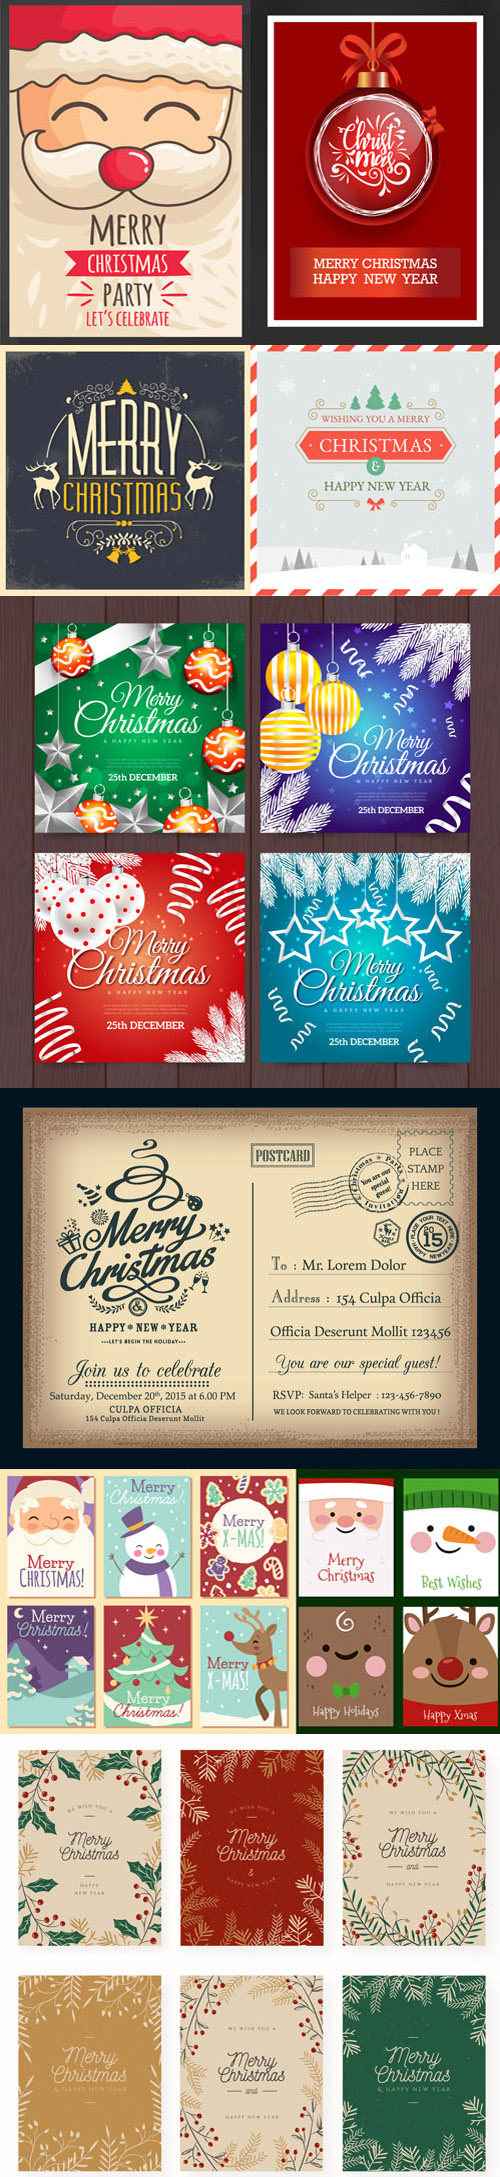 Pretty Merry Christmas Cards Collection in Vector